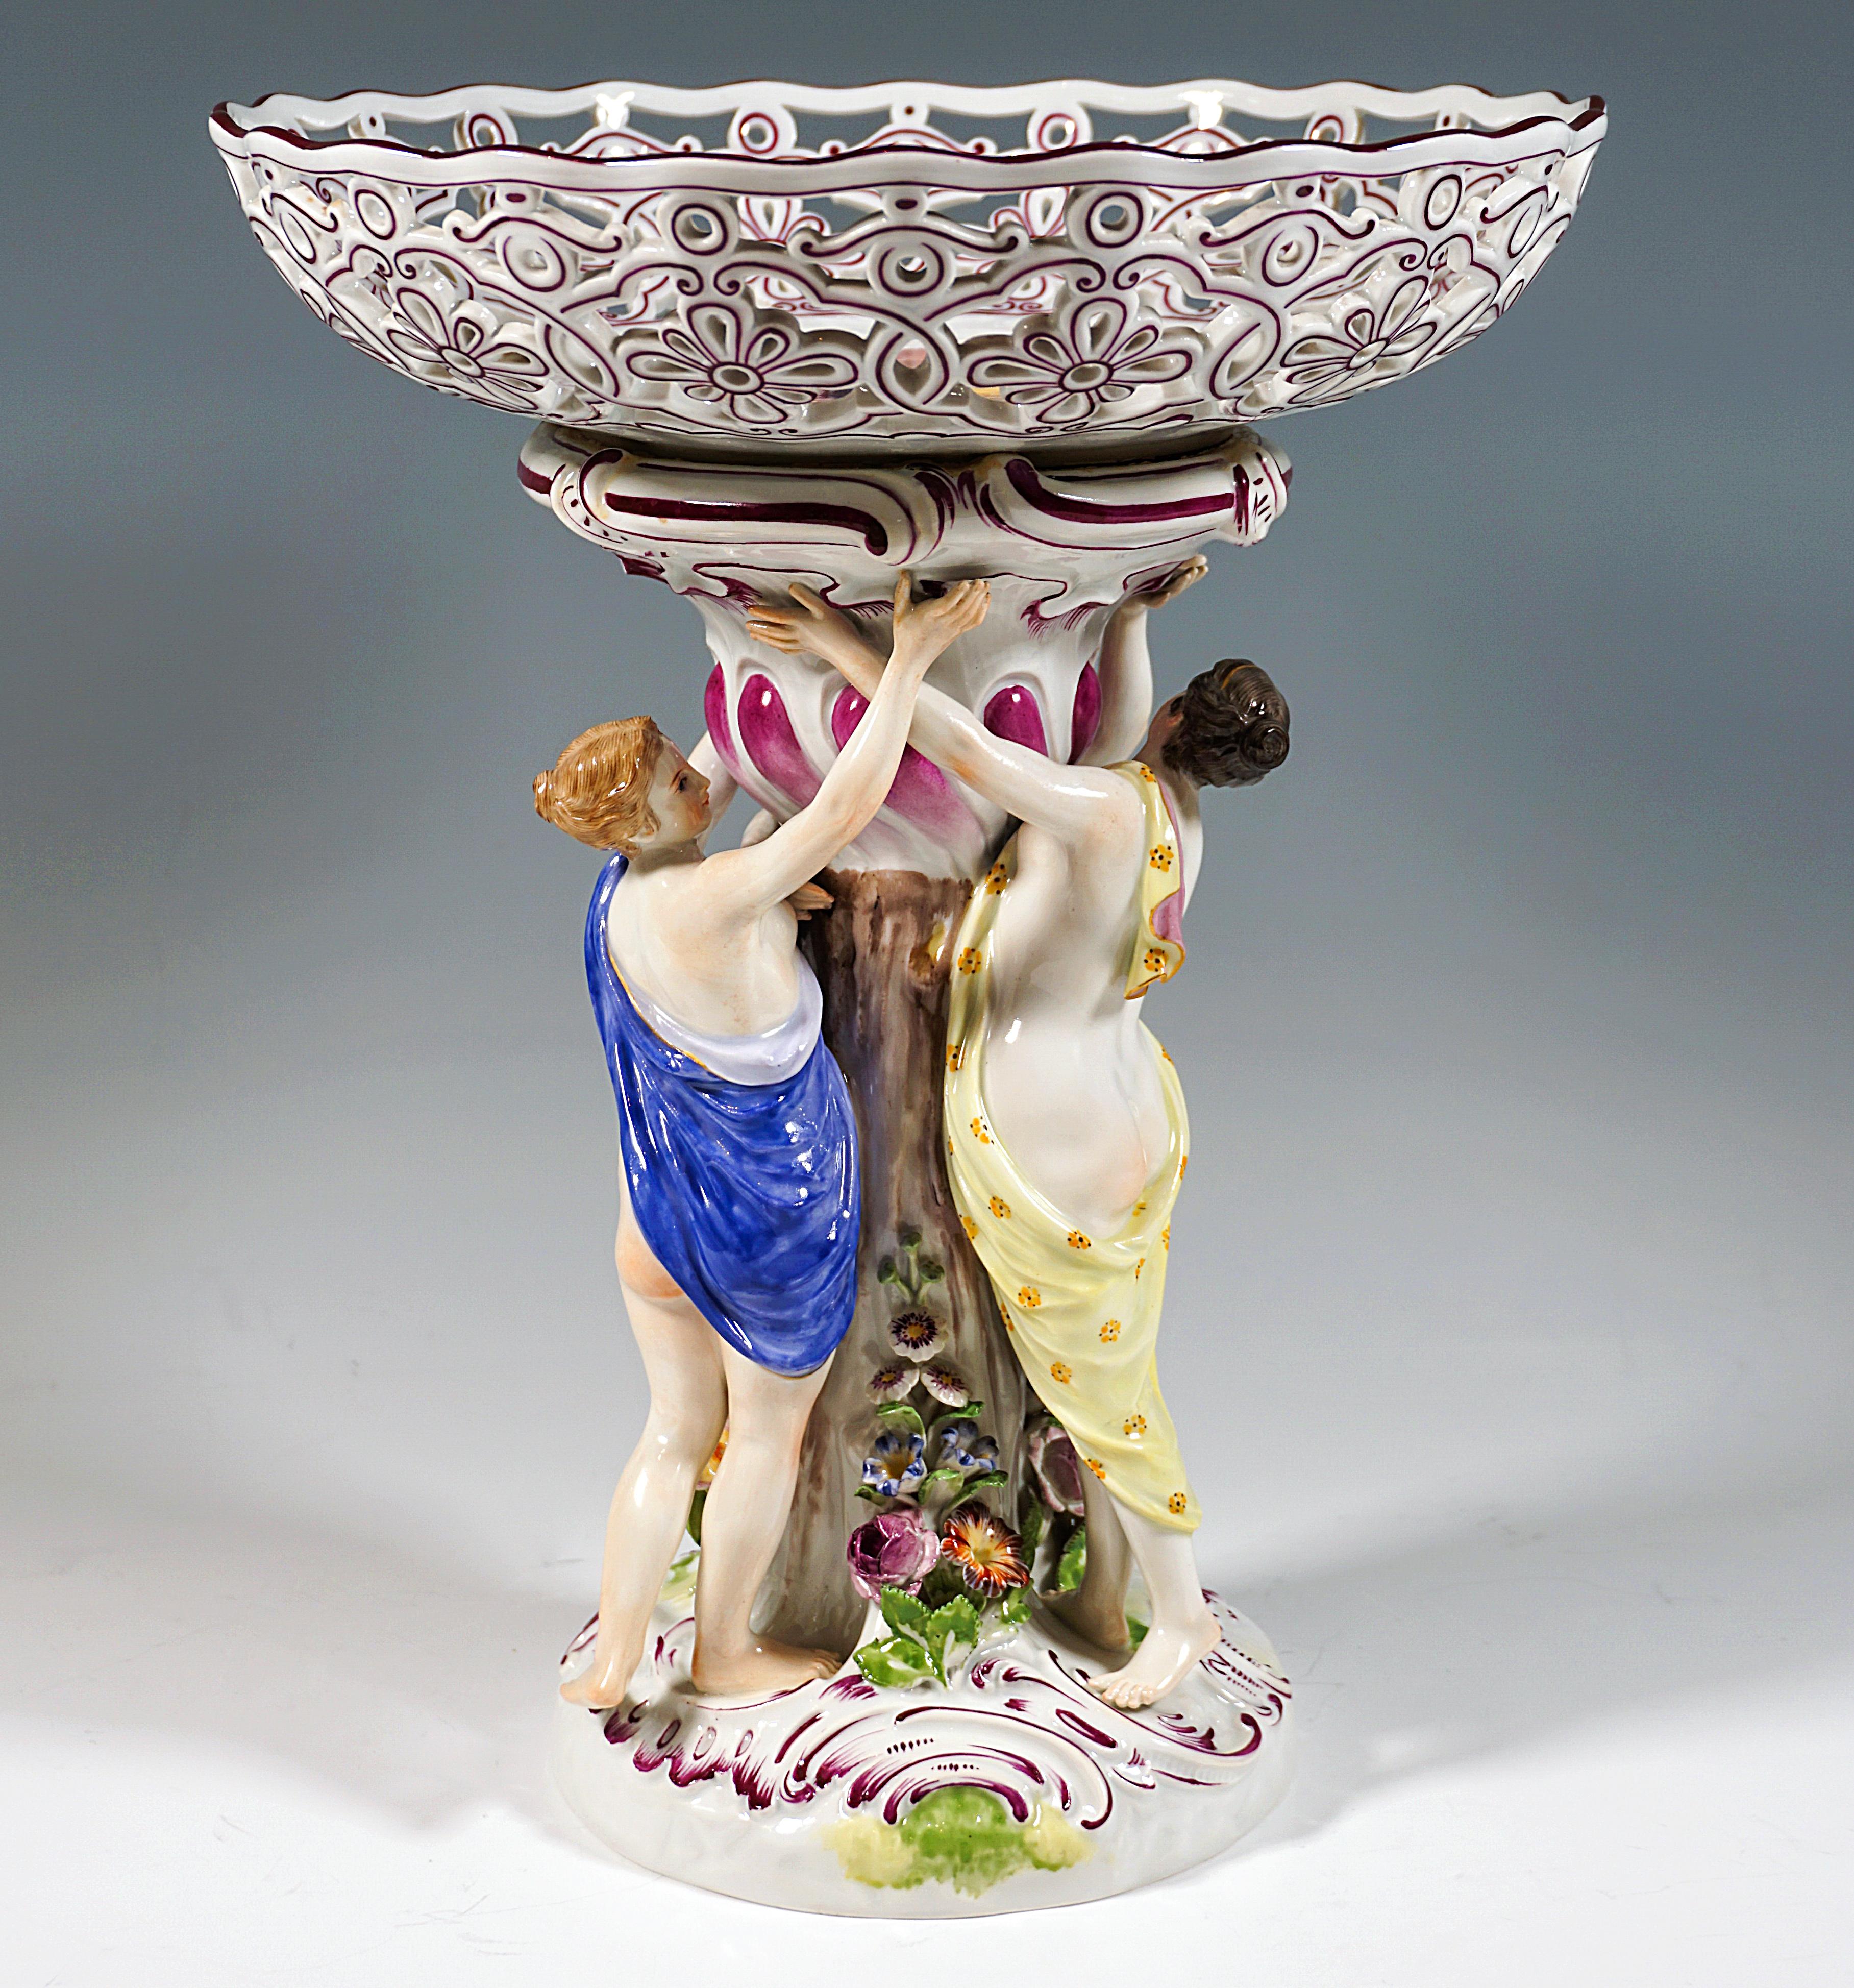 Meissen Piece with excellent fruit painting:
On a round, low rock base with purple heightened rocailles in the center a tree trunk, on which from the ground vividly formed floral bunches are climbing up, three young graces wrapped only in cloths